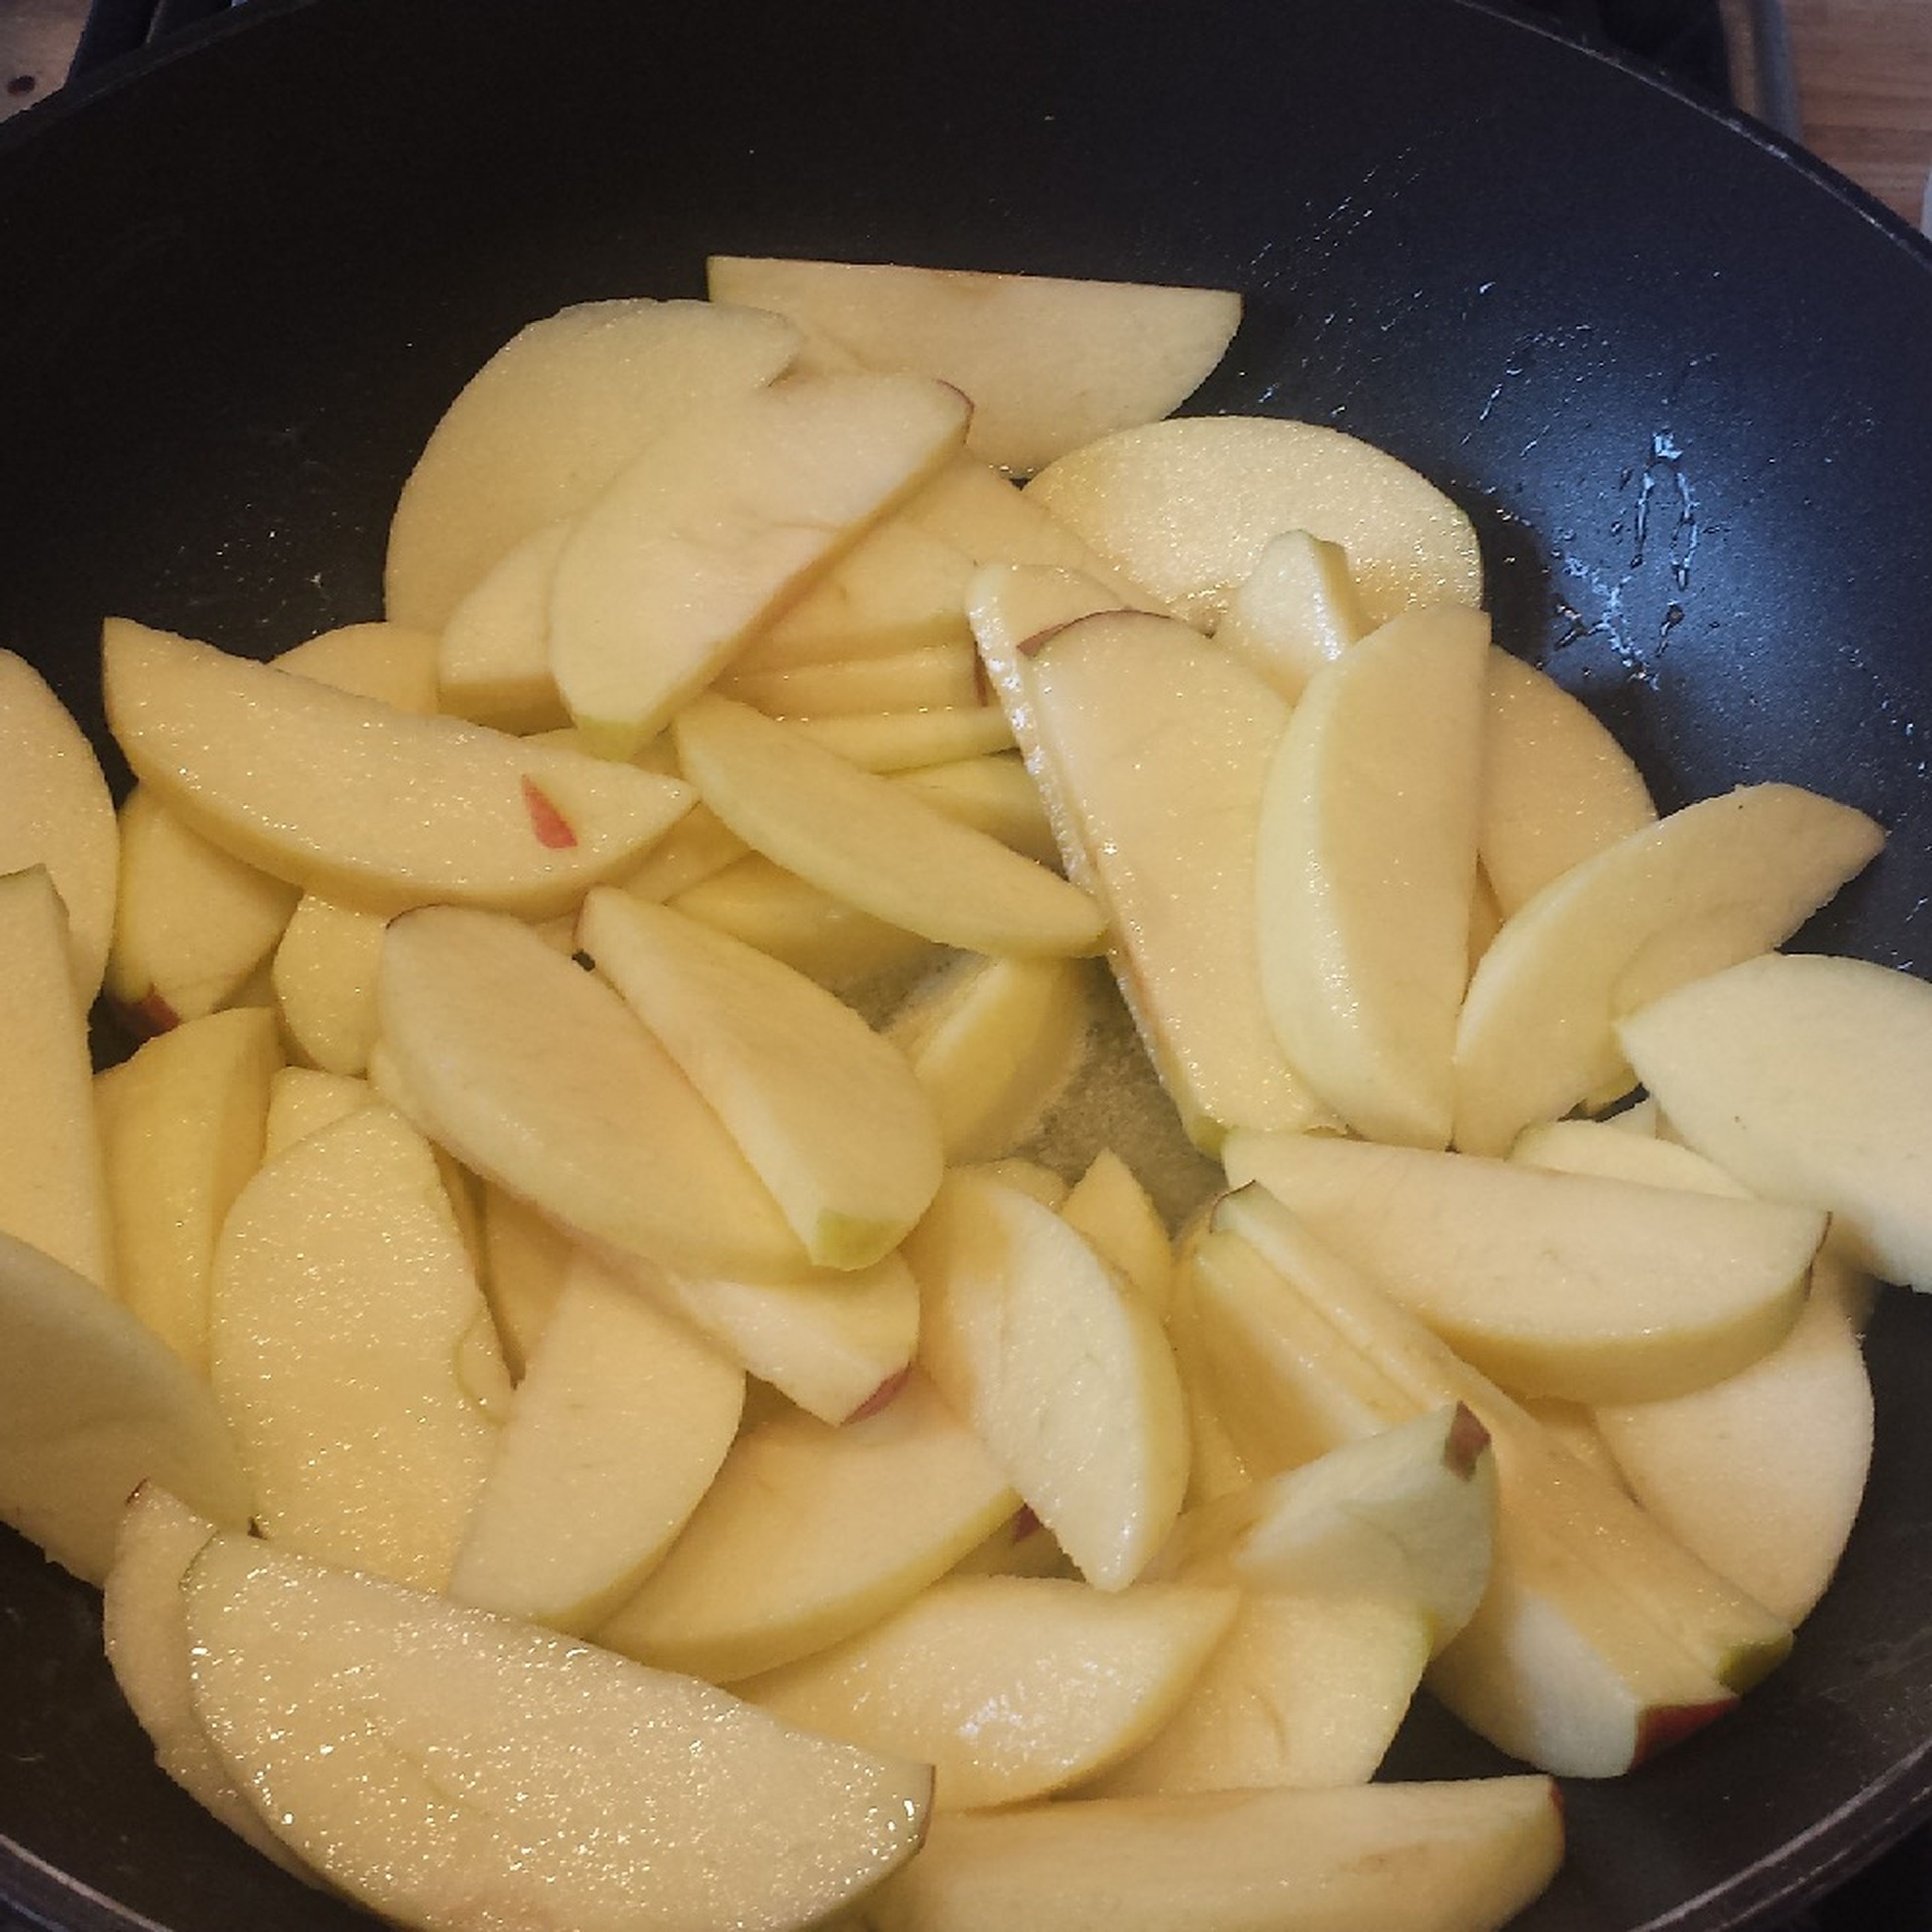 Peel, core, and slice apples. Melt remaining butter in a pan set over medium heat and add apple slices.